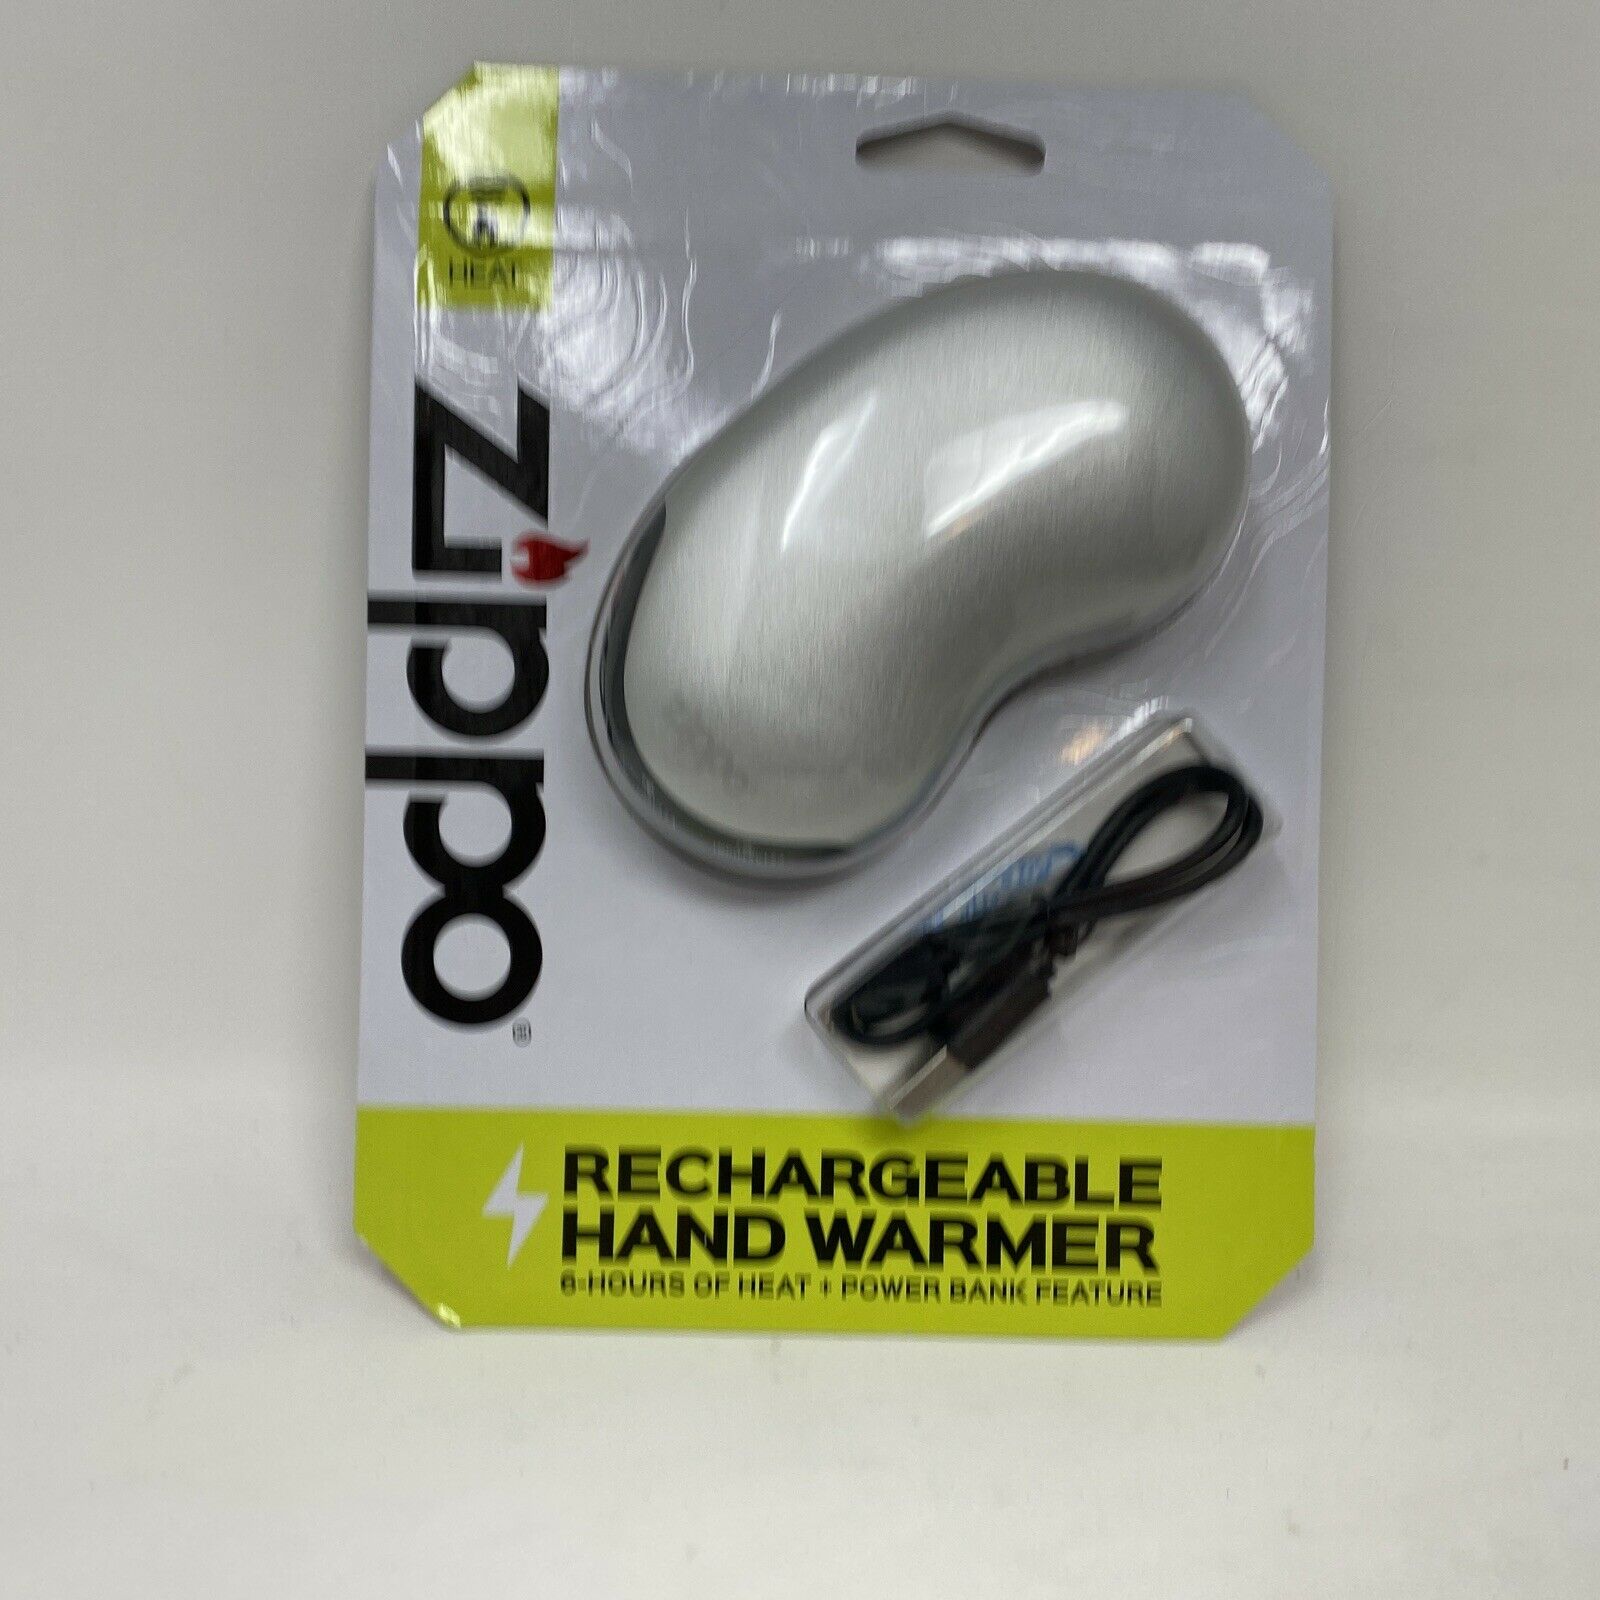 Zippo Rechargeable Hand Warmer + Power Bank. 6 Hours Of Heat! Gray. New.